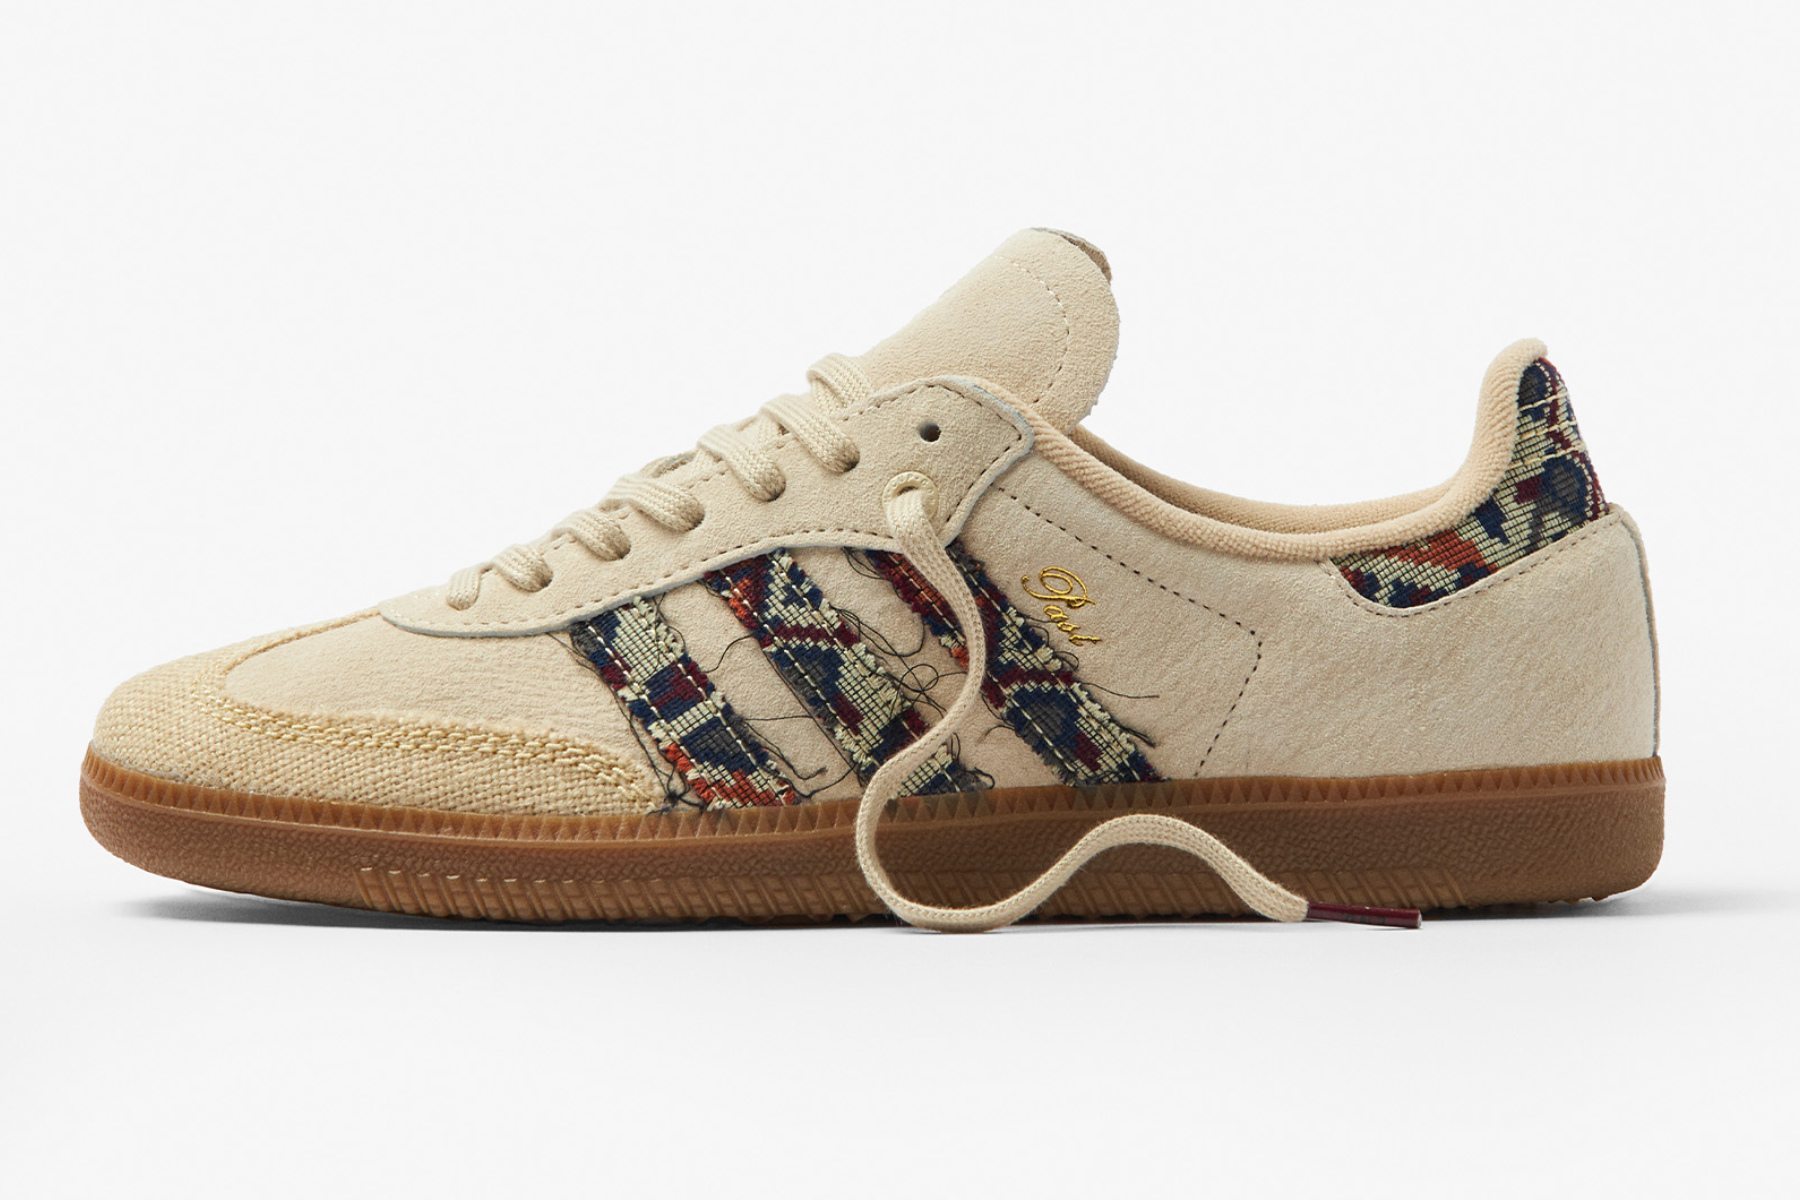 END.'s adidas Samba sneaker is inspired by traditional weaving with tapestry-like materials adorning the epochal three stripes.